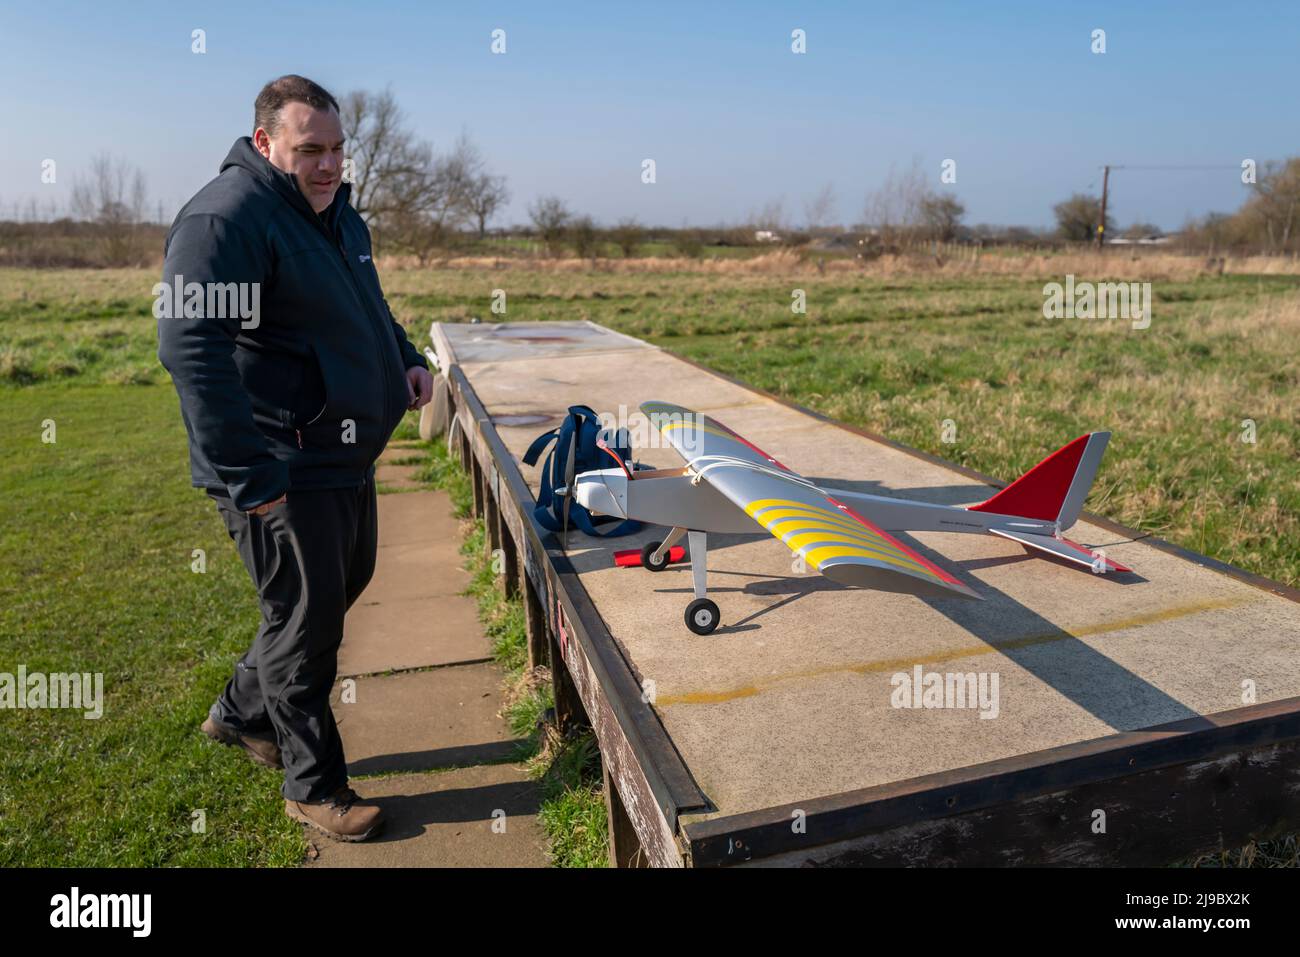 A radio controlled plane with the pilot. Stock Photo